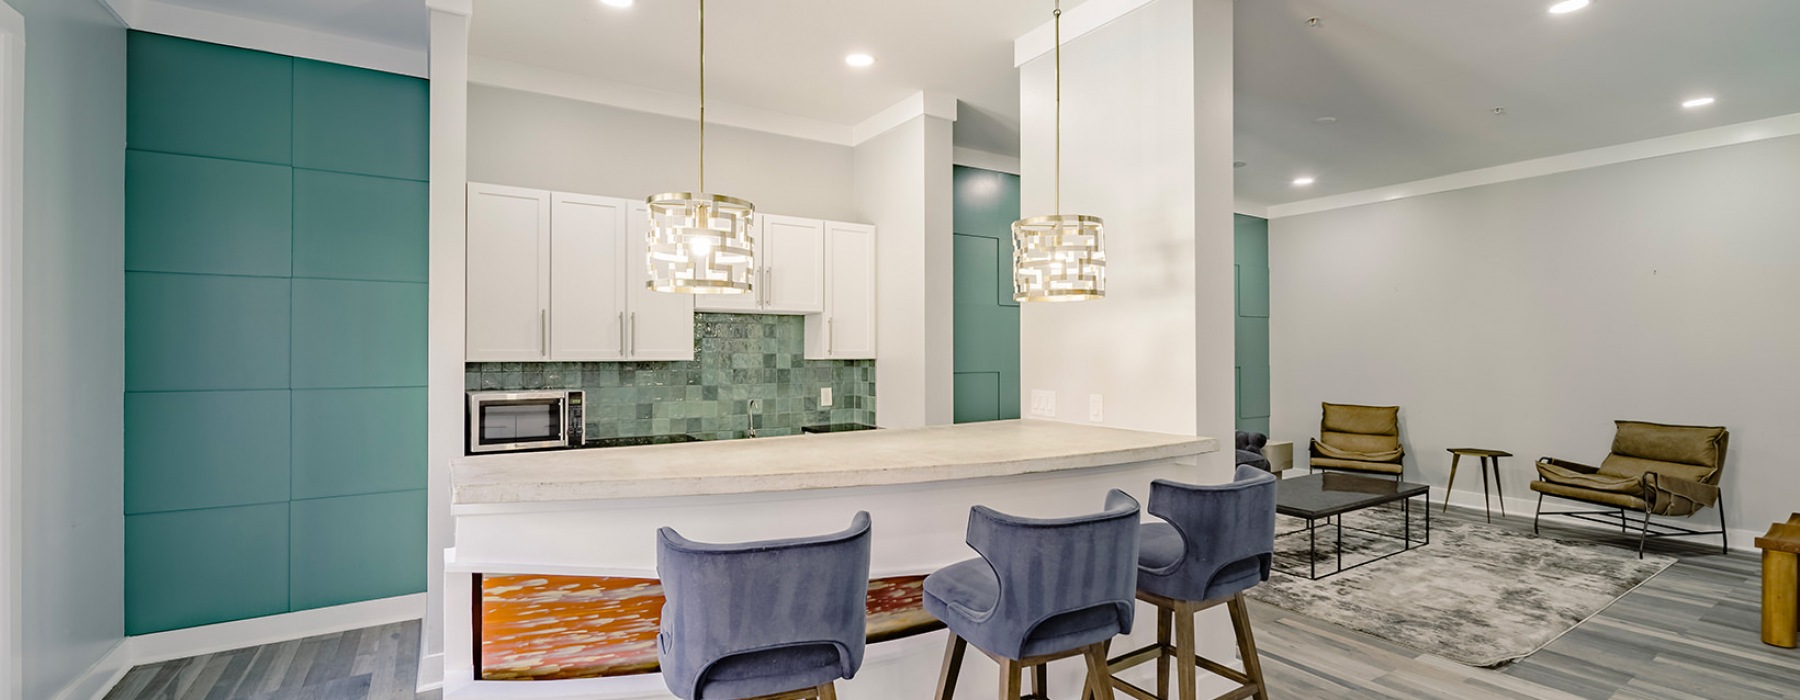 pendant lighting over serving counter in clubhouse kitchen